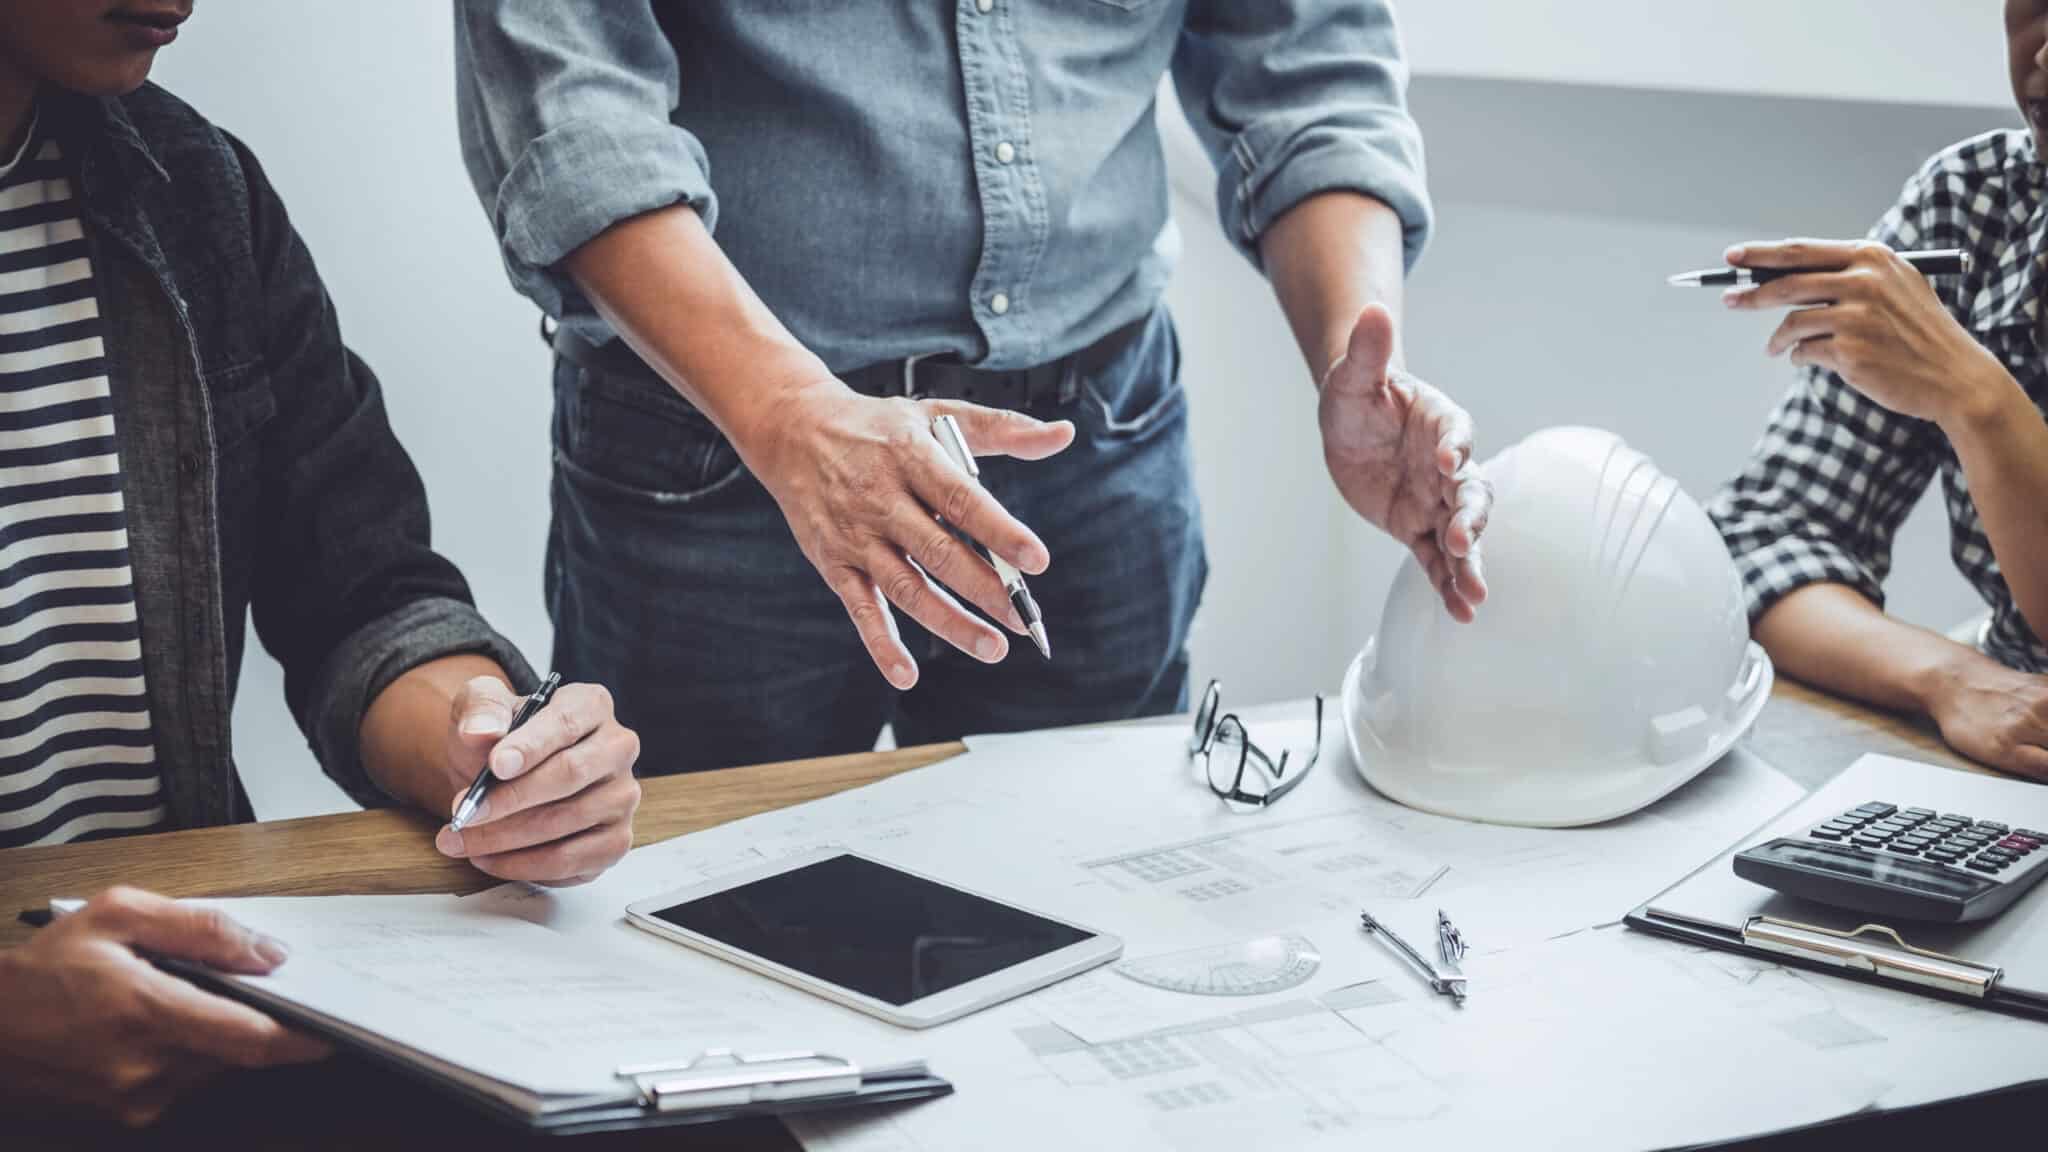 how to start a construction company - research